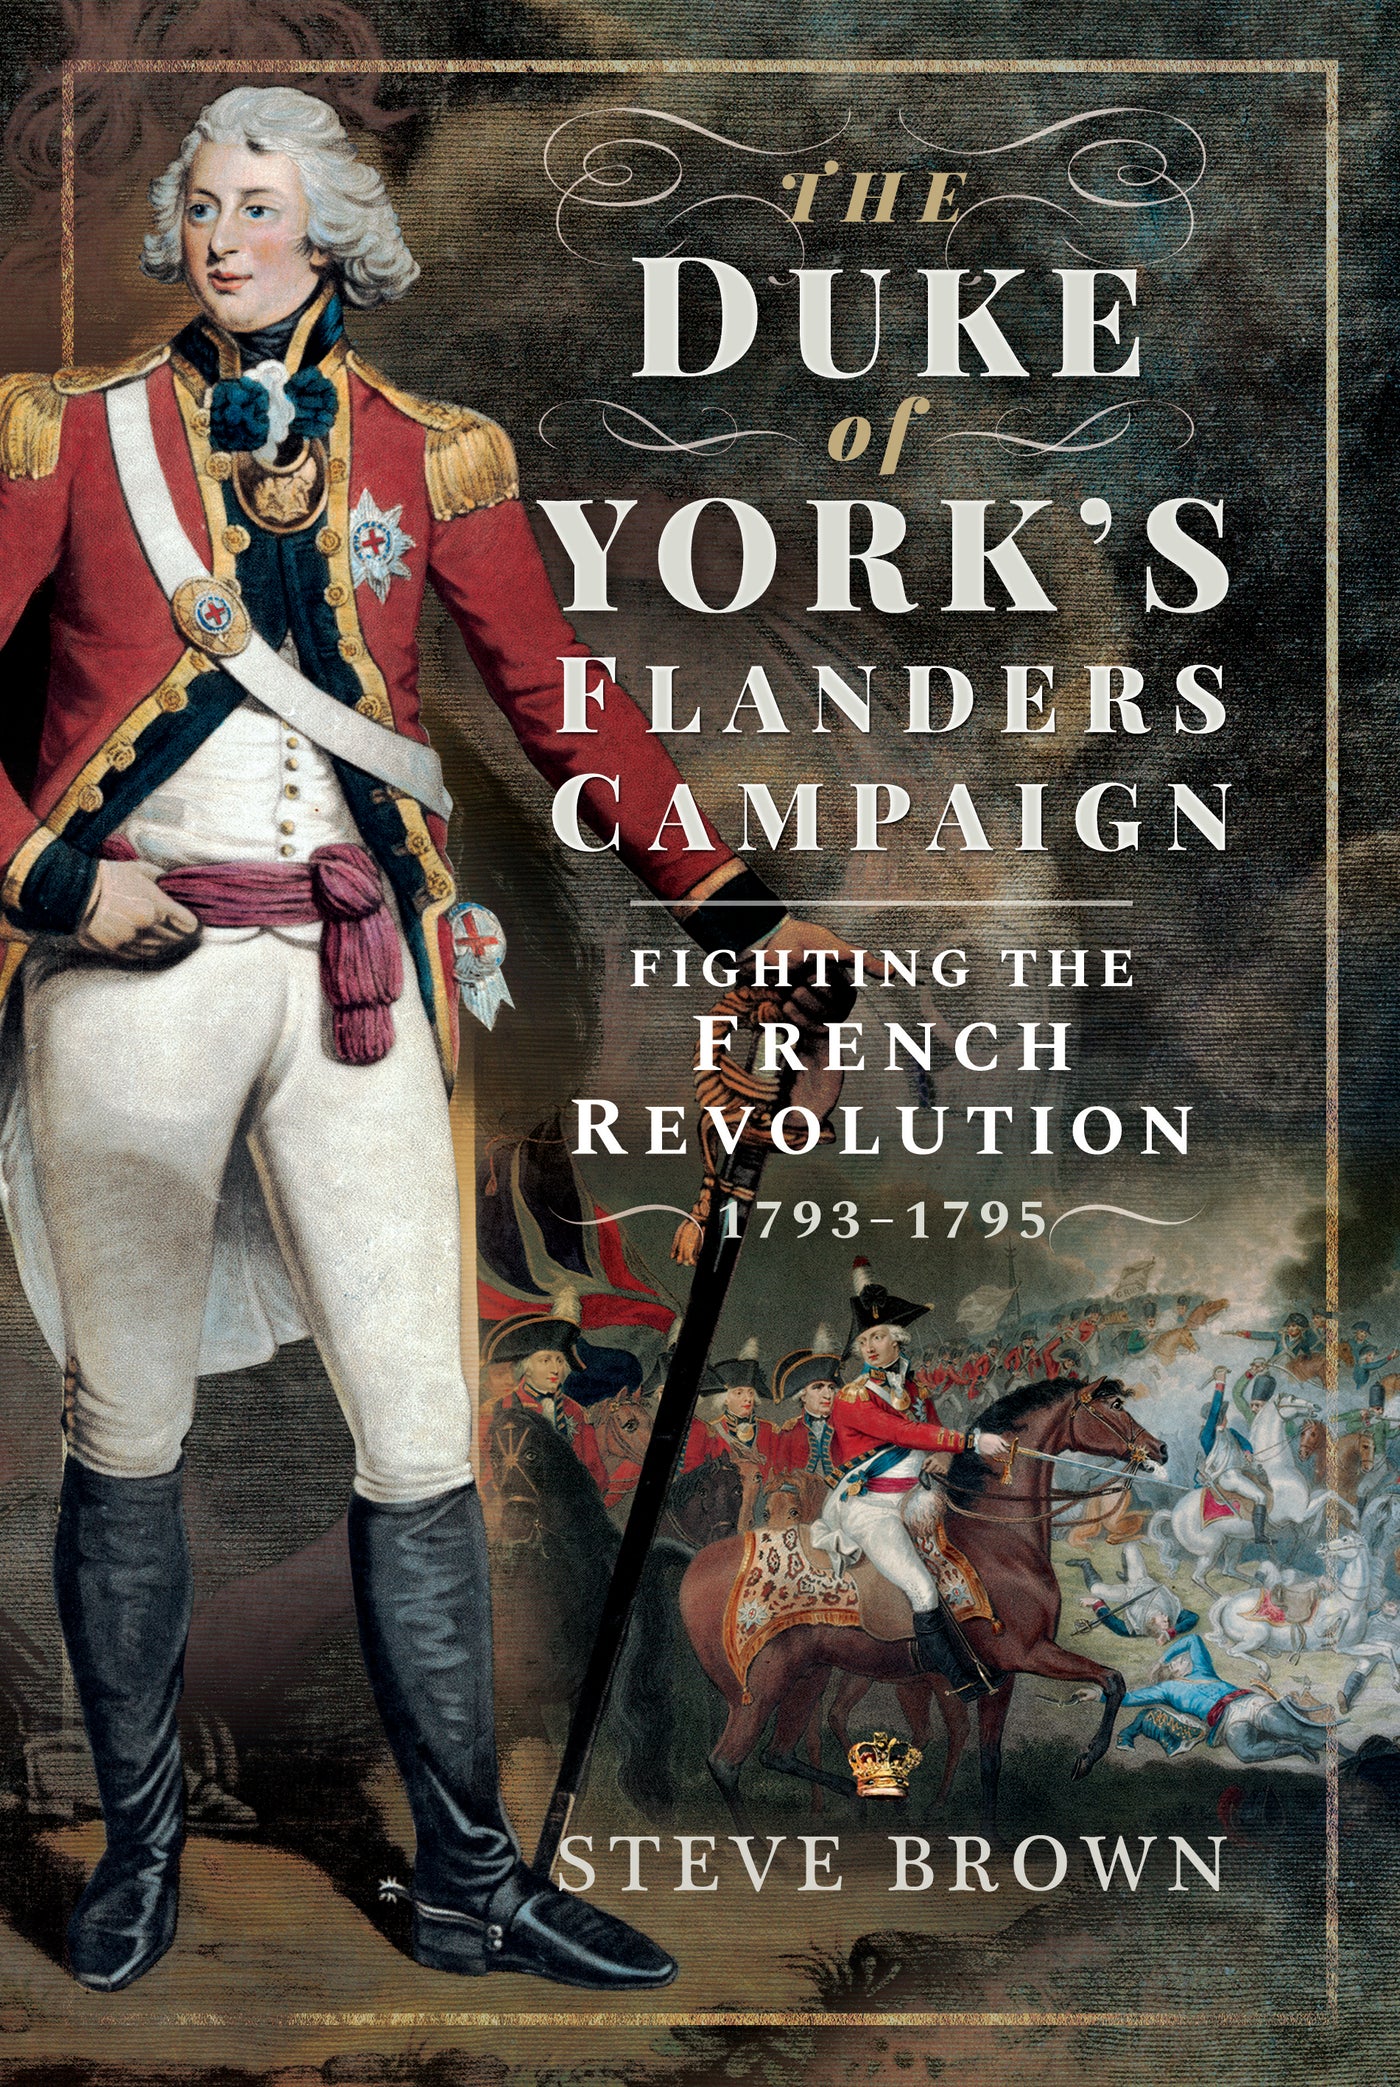 The Duke of York's Flanders Campaign